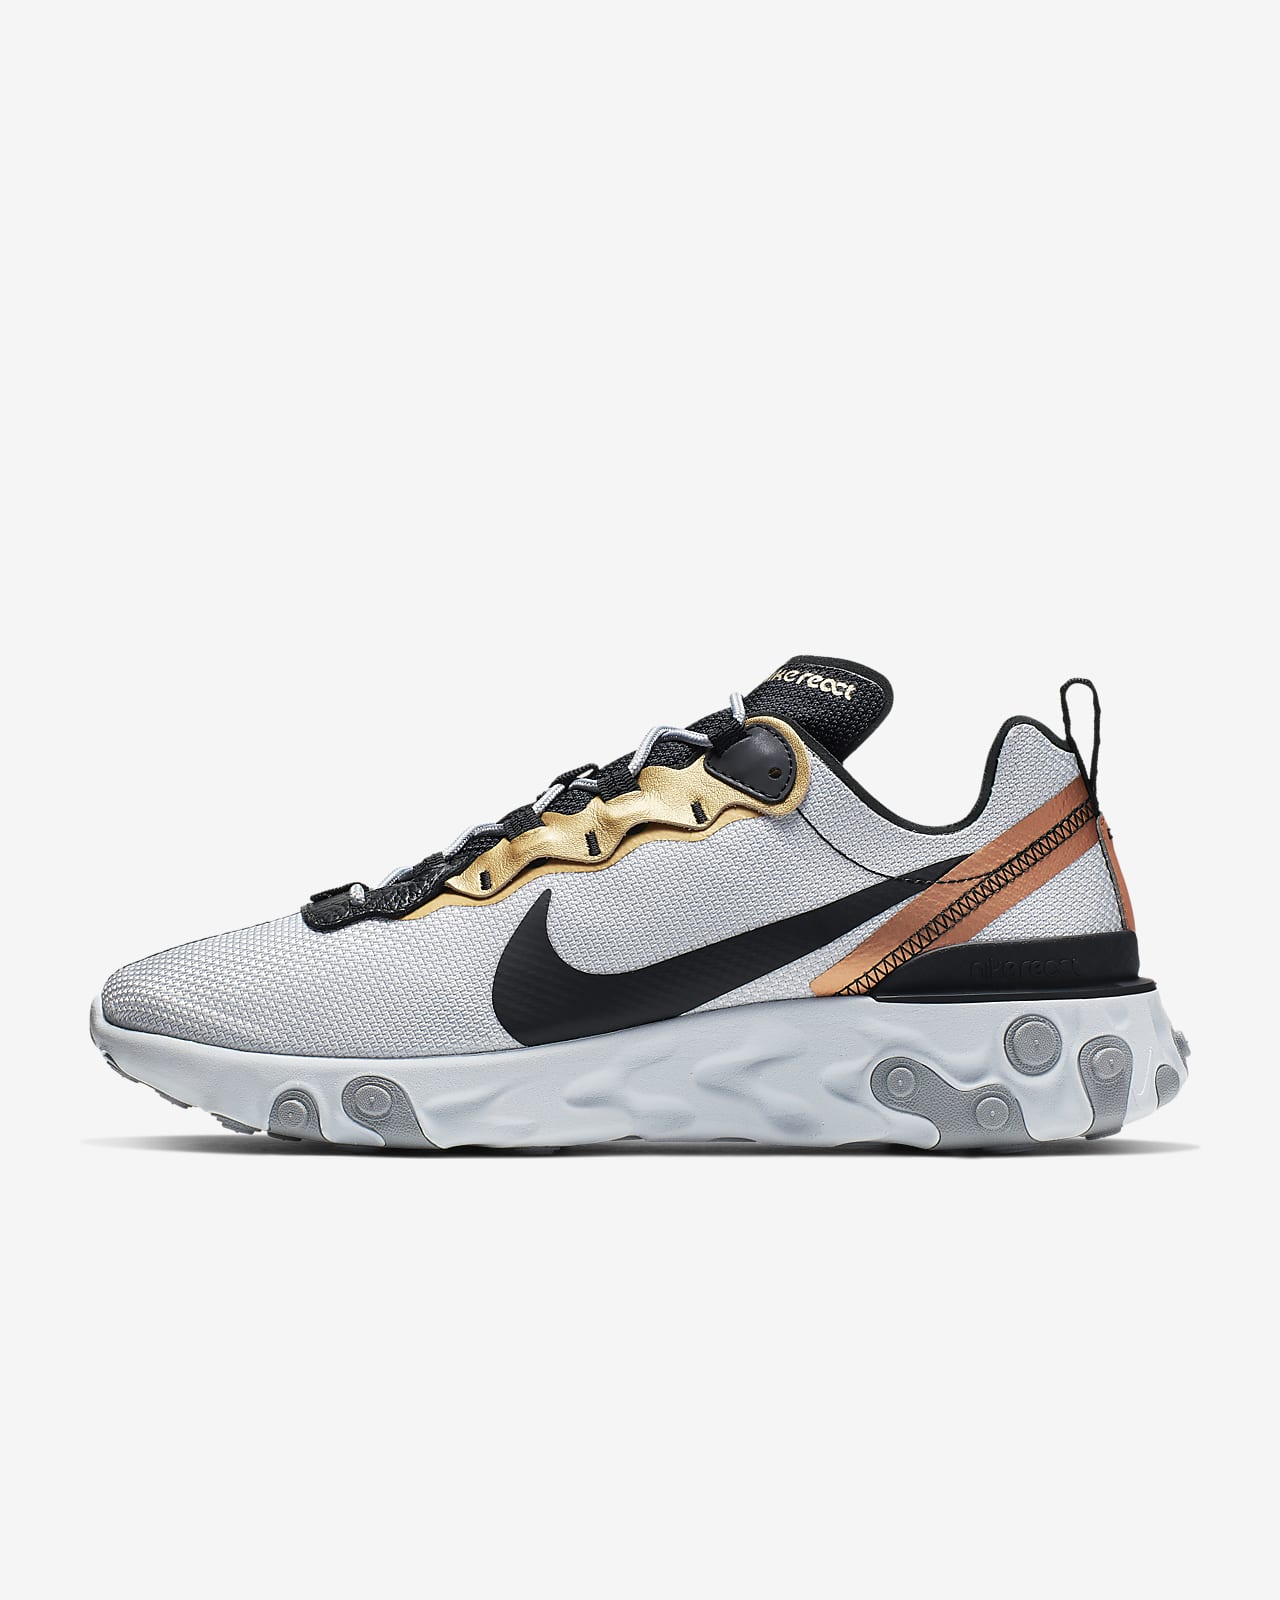 mike react element